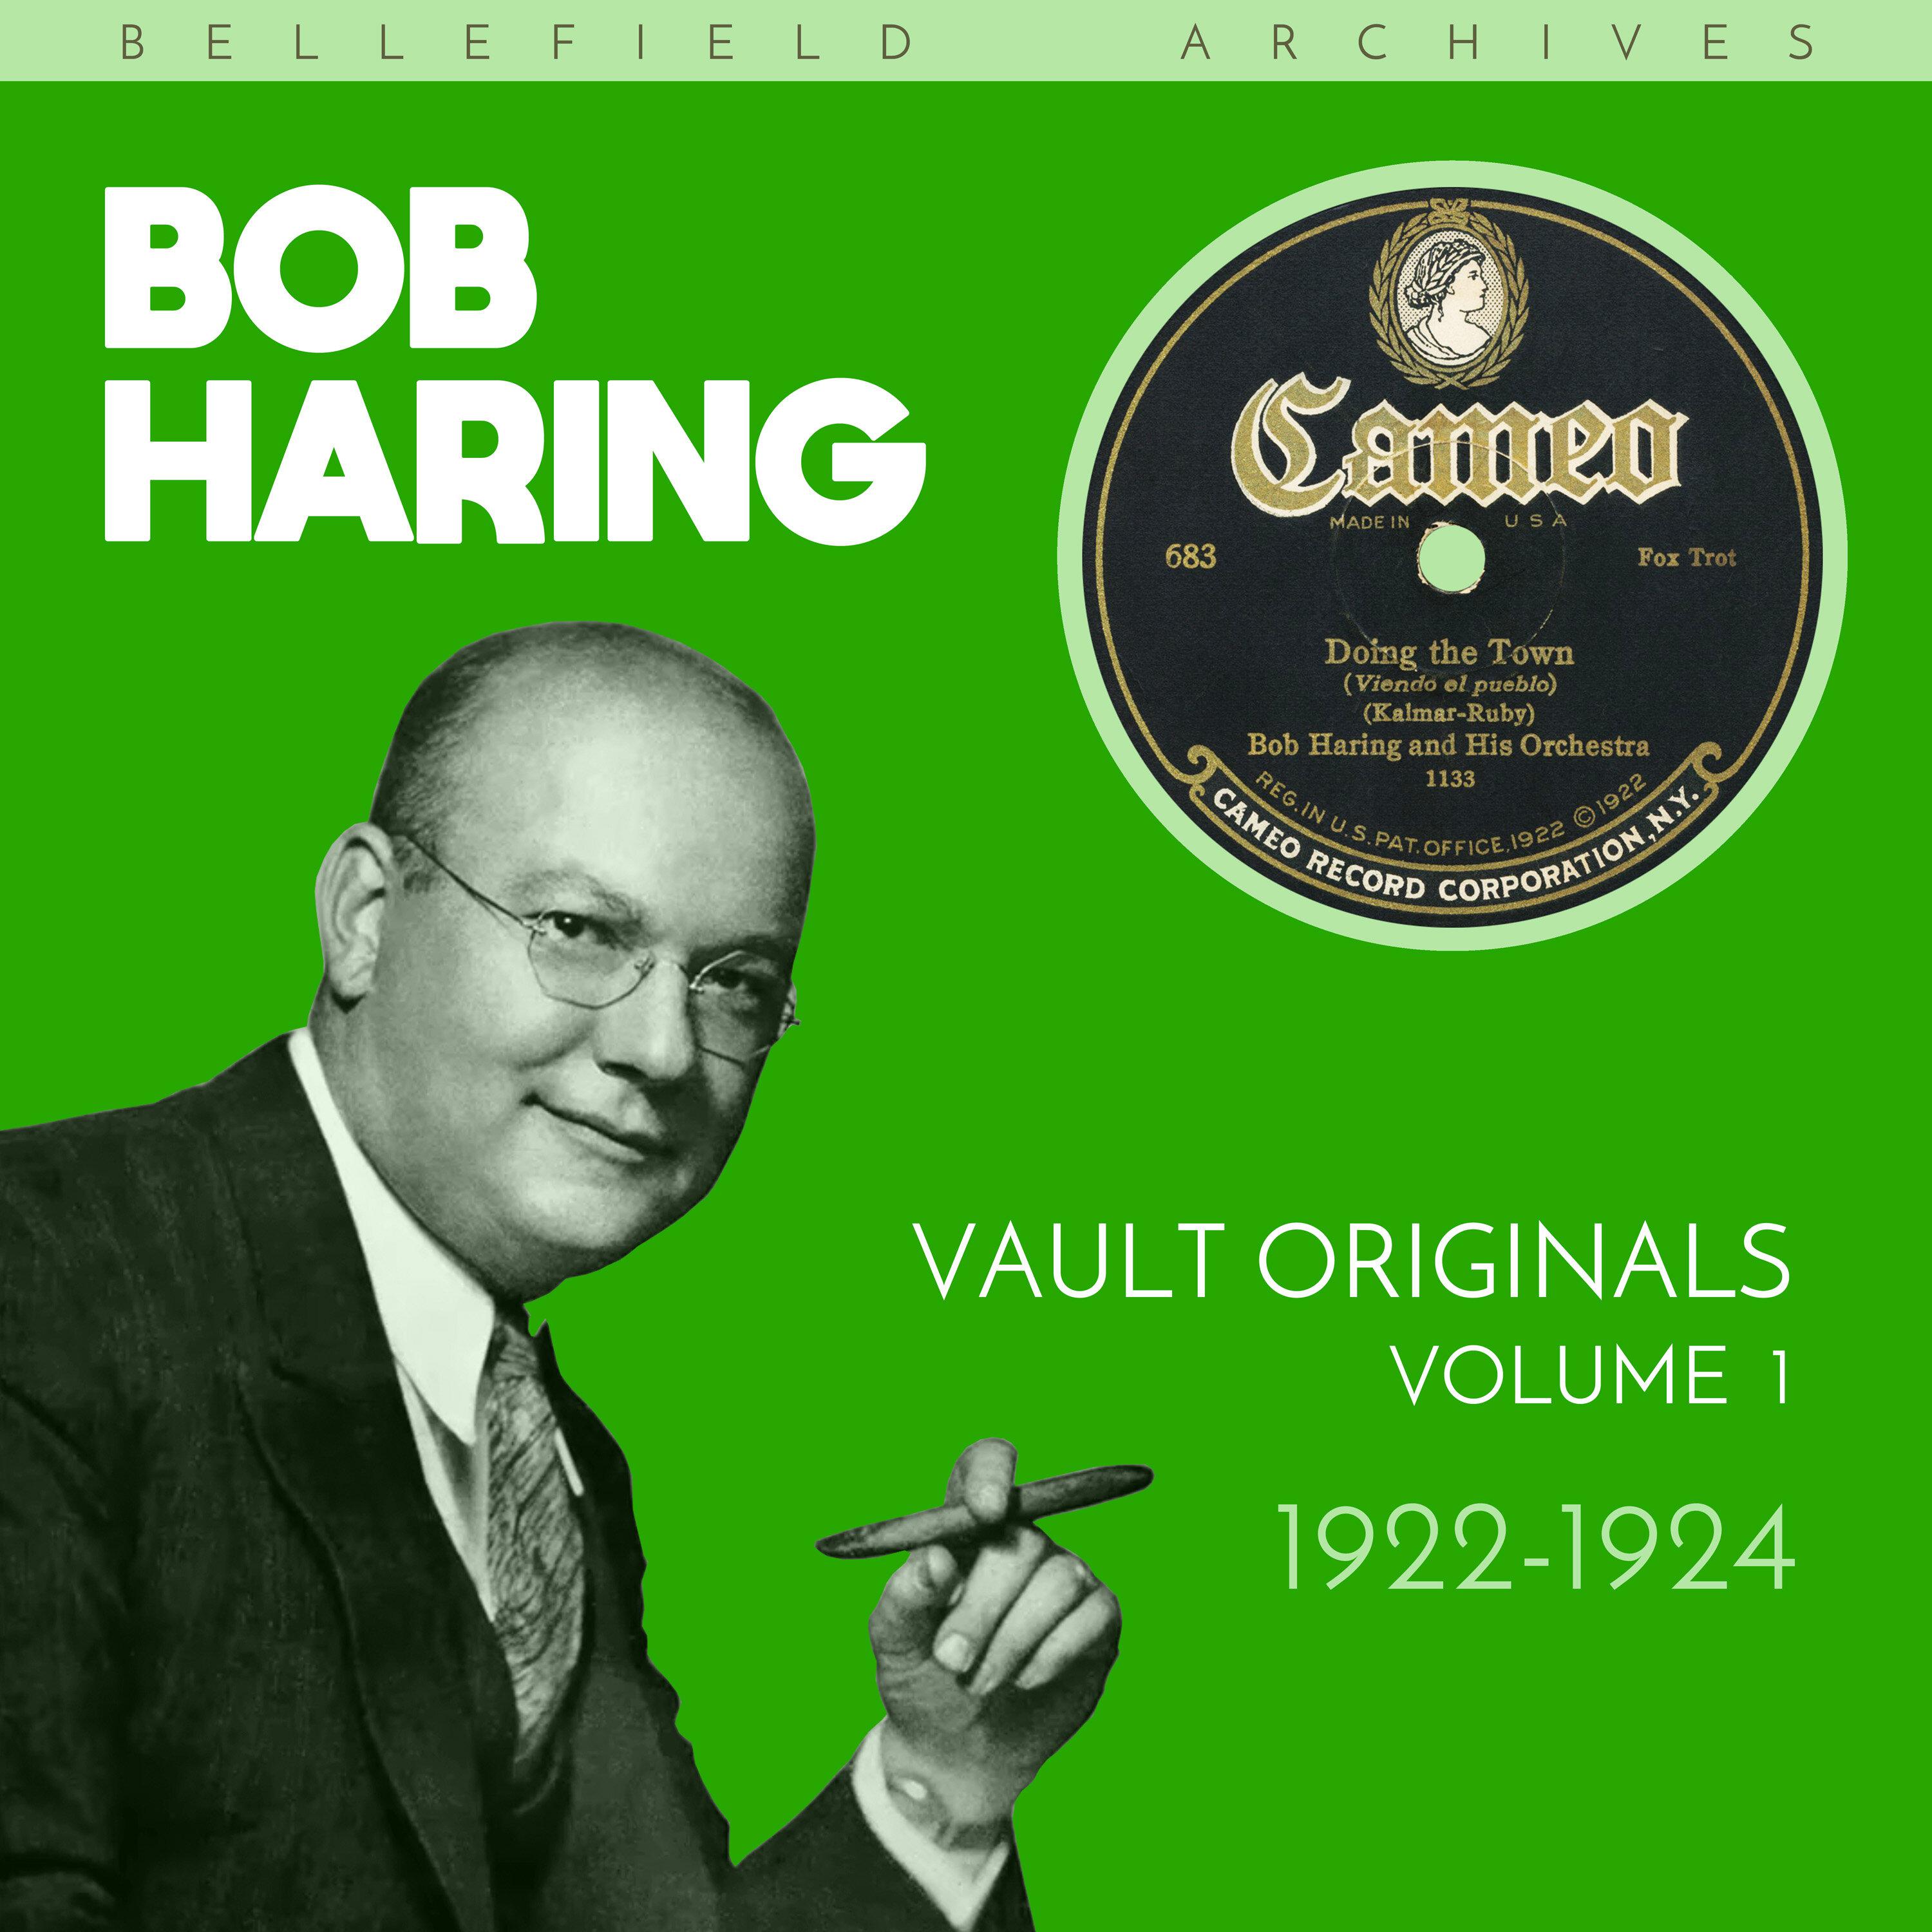 Bob Haring and His Orchestra - It's Not the First Time You Left Me (But It's the Last Time You'll Come Back)